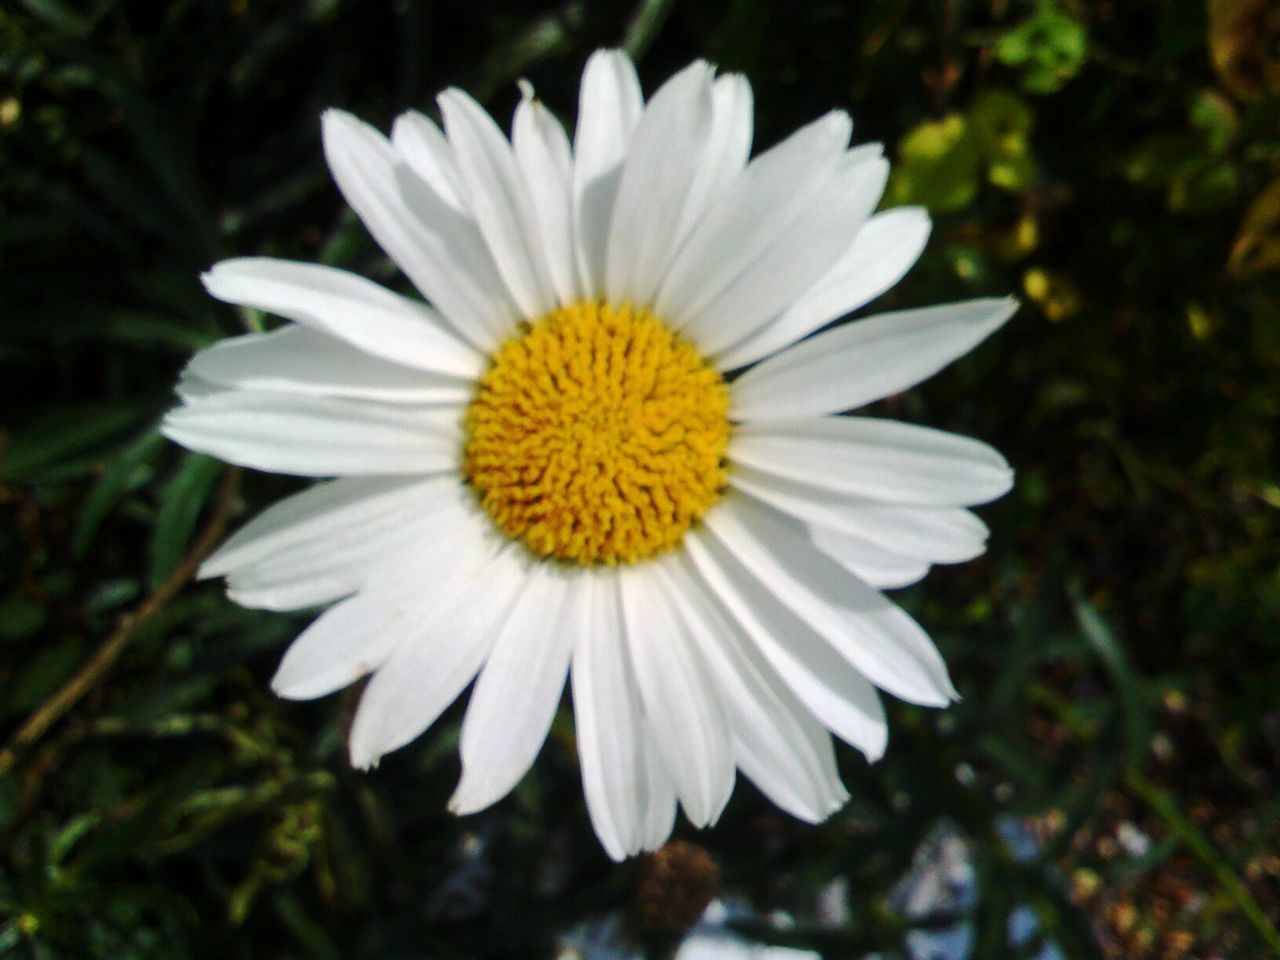 flower, petal, flower head, freshness, fragility, white color, pollen, single flower, yellow, daisy, growth, blooming, beauty in nature, close-up, focus on foreground, nature, plant, in bloom, outdoors, day